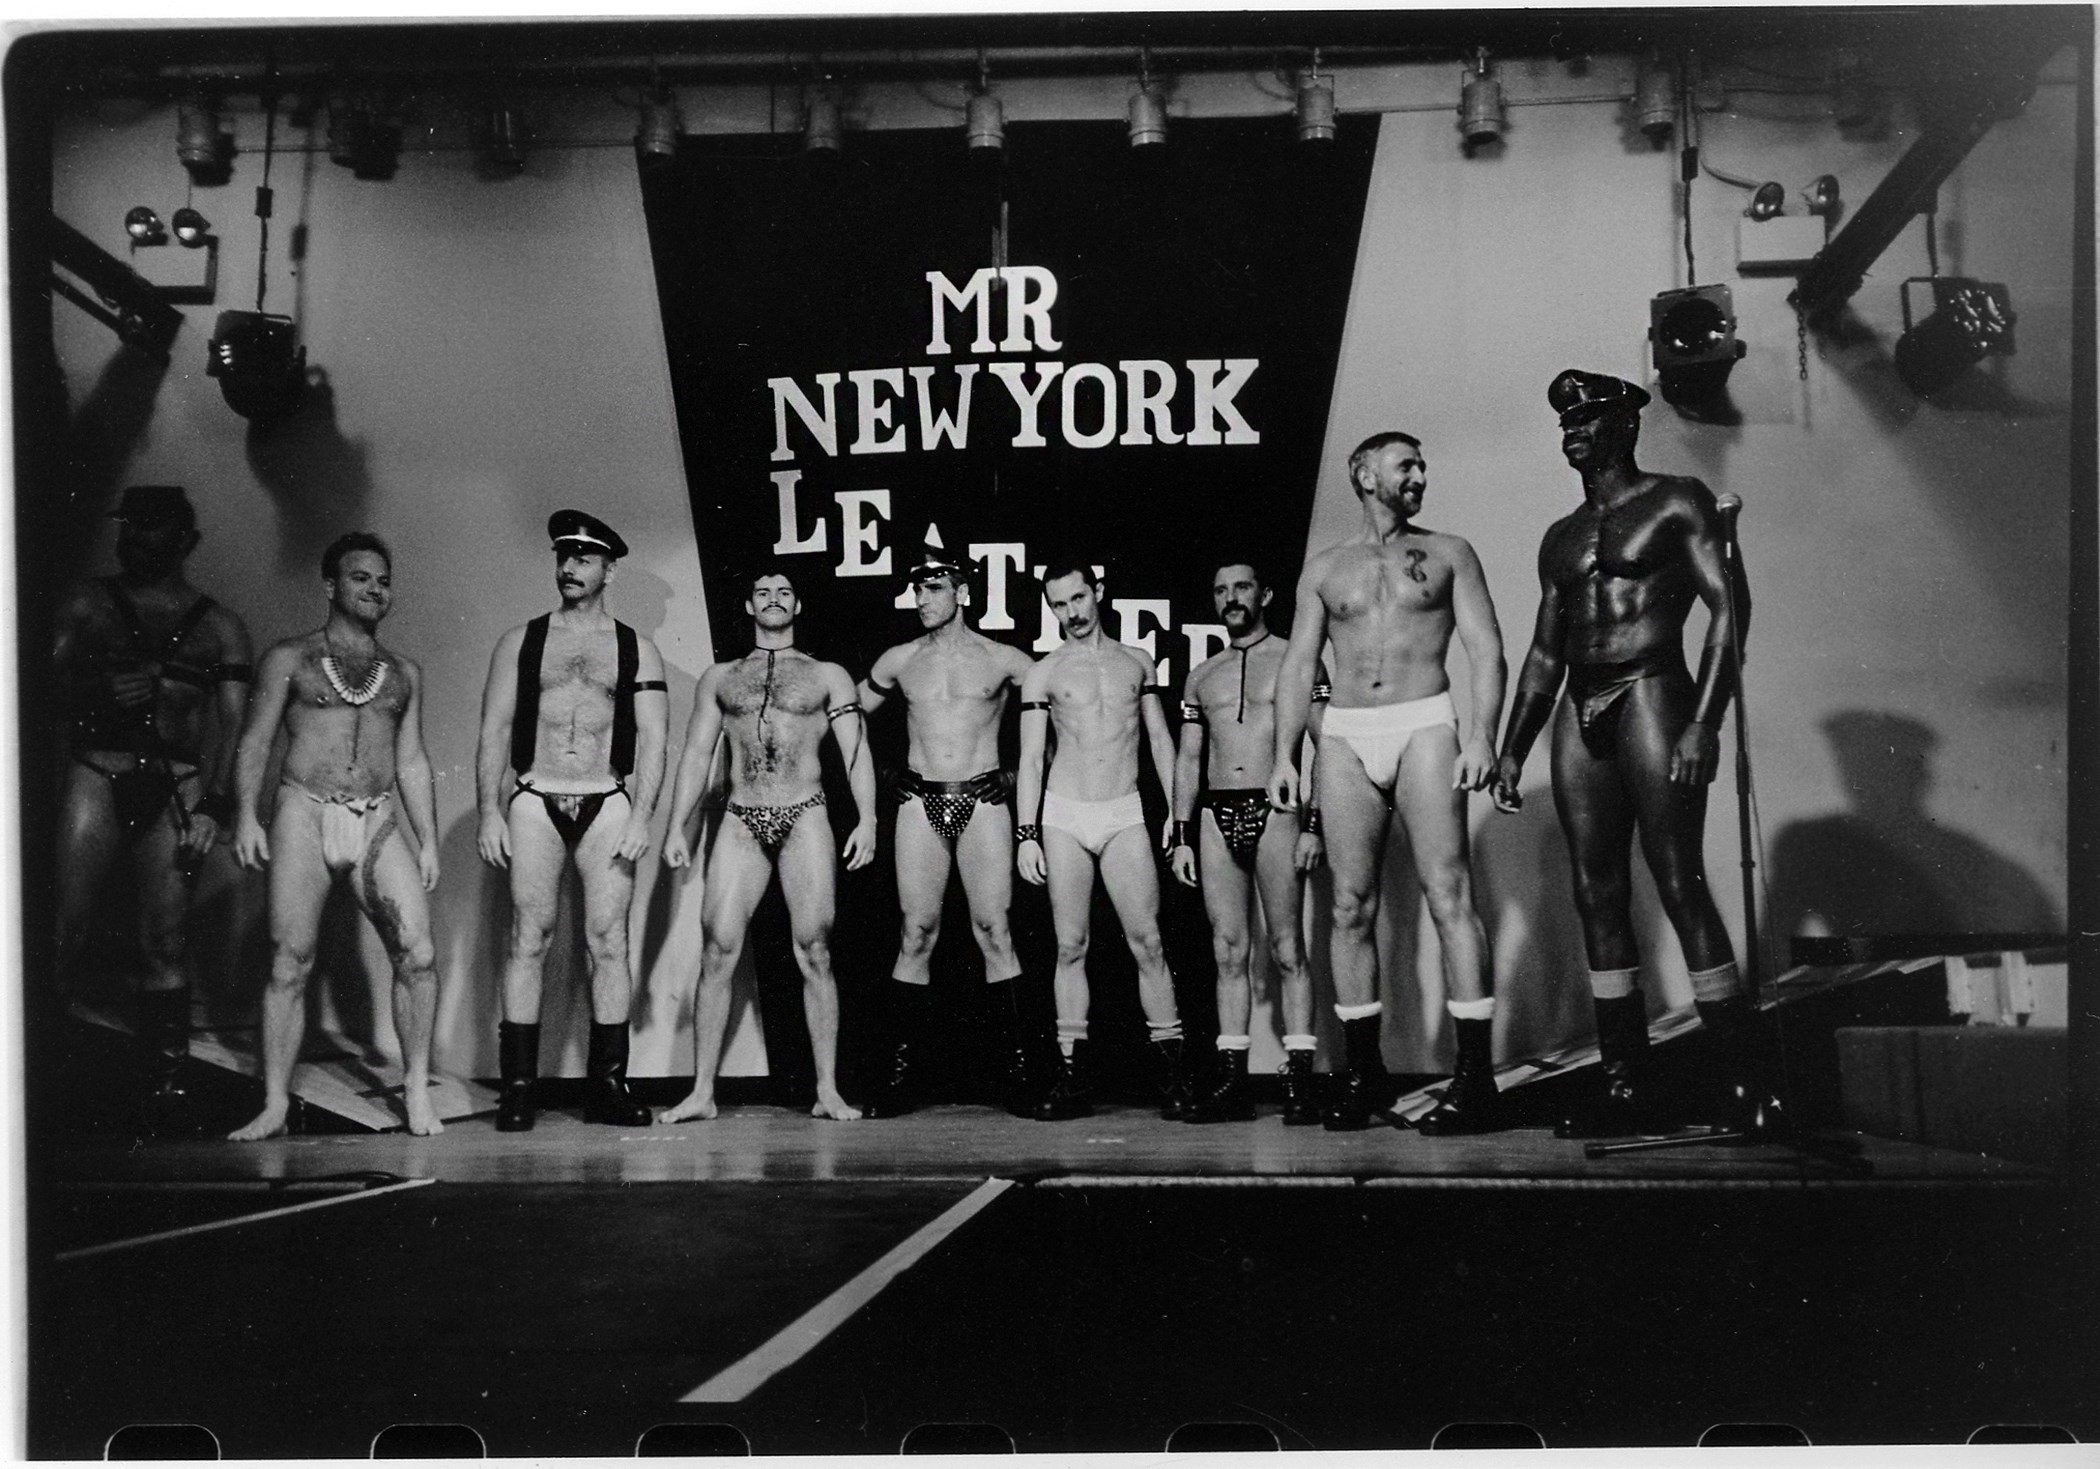 Porn Scan 1980s Sets - Photos Exploring What It Meant to Be Gay in 1980s New York | AnOther